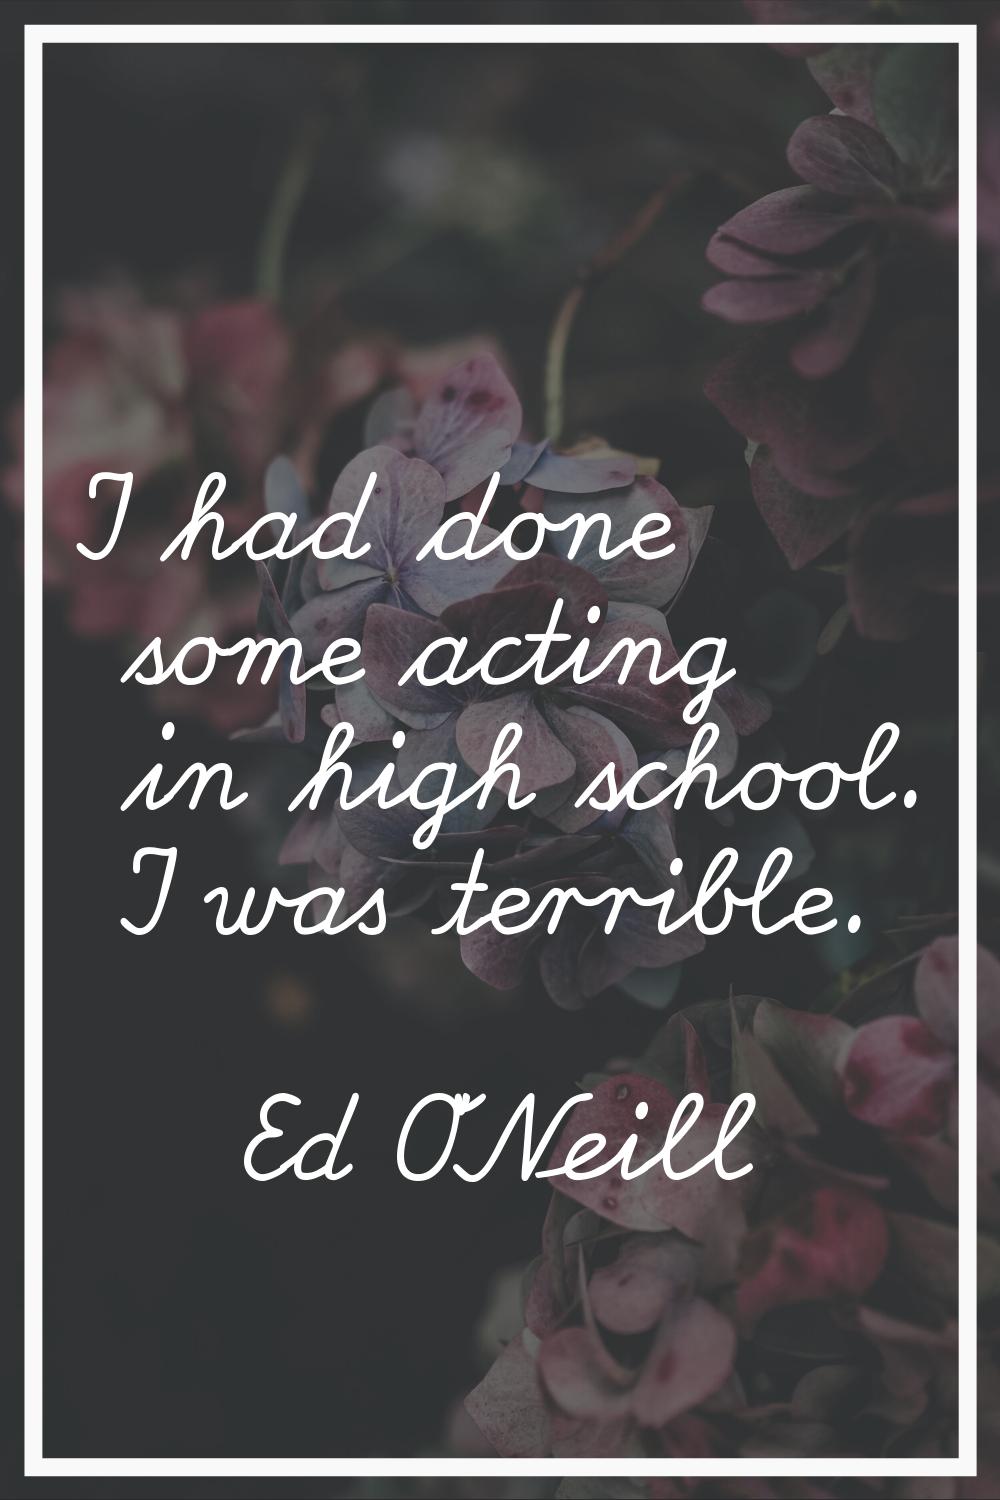 I had done some acting in high school. I was terrible.